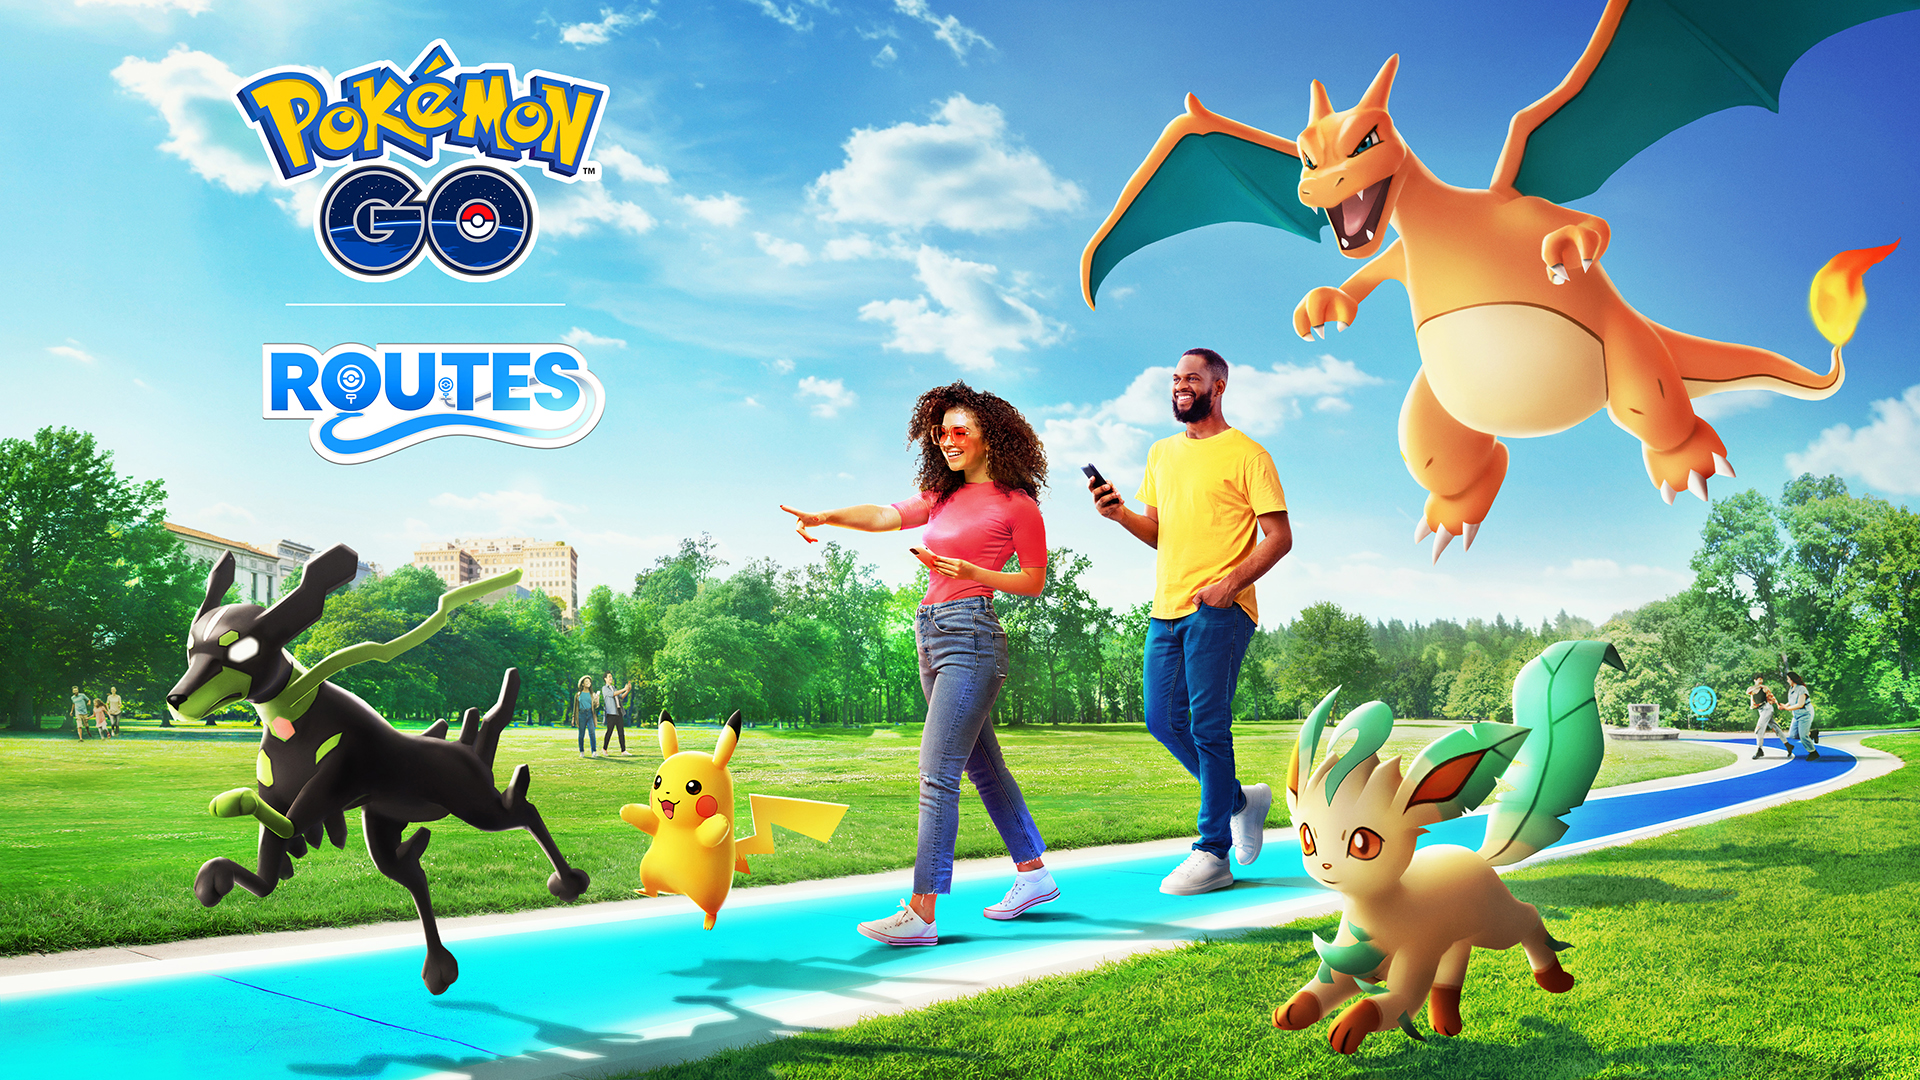 A man and woman walk along a route with Pokémon Zygarde, Pikachu, Charizard, and Leafeon through a park in artwork for Pokémon Go